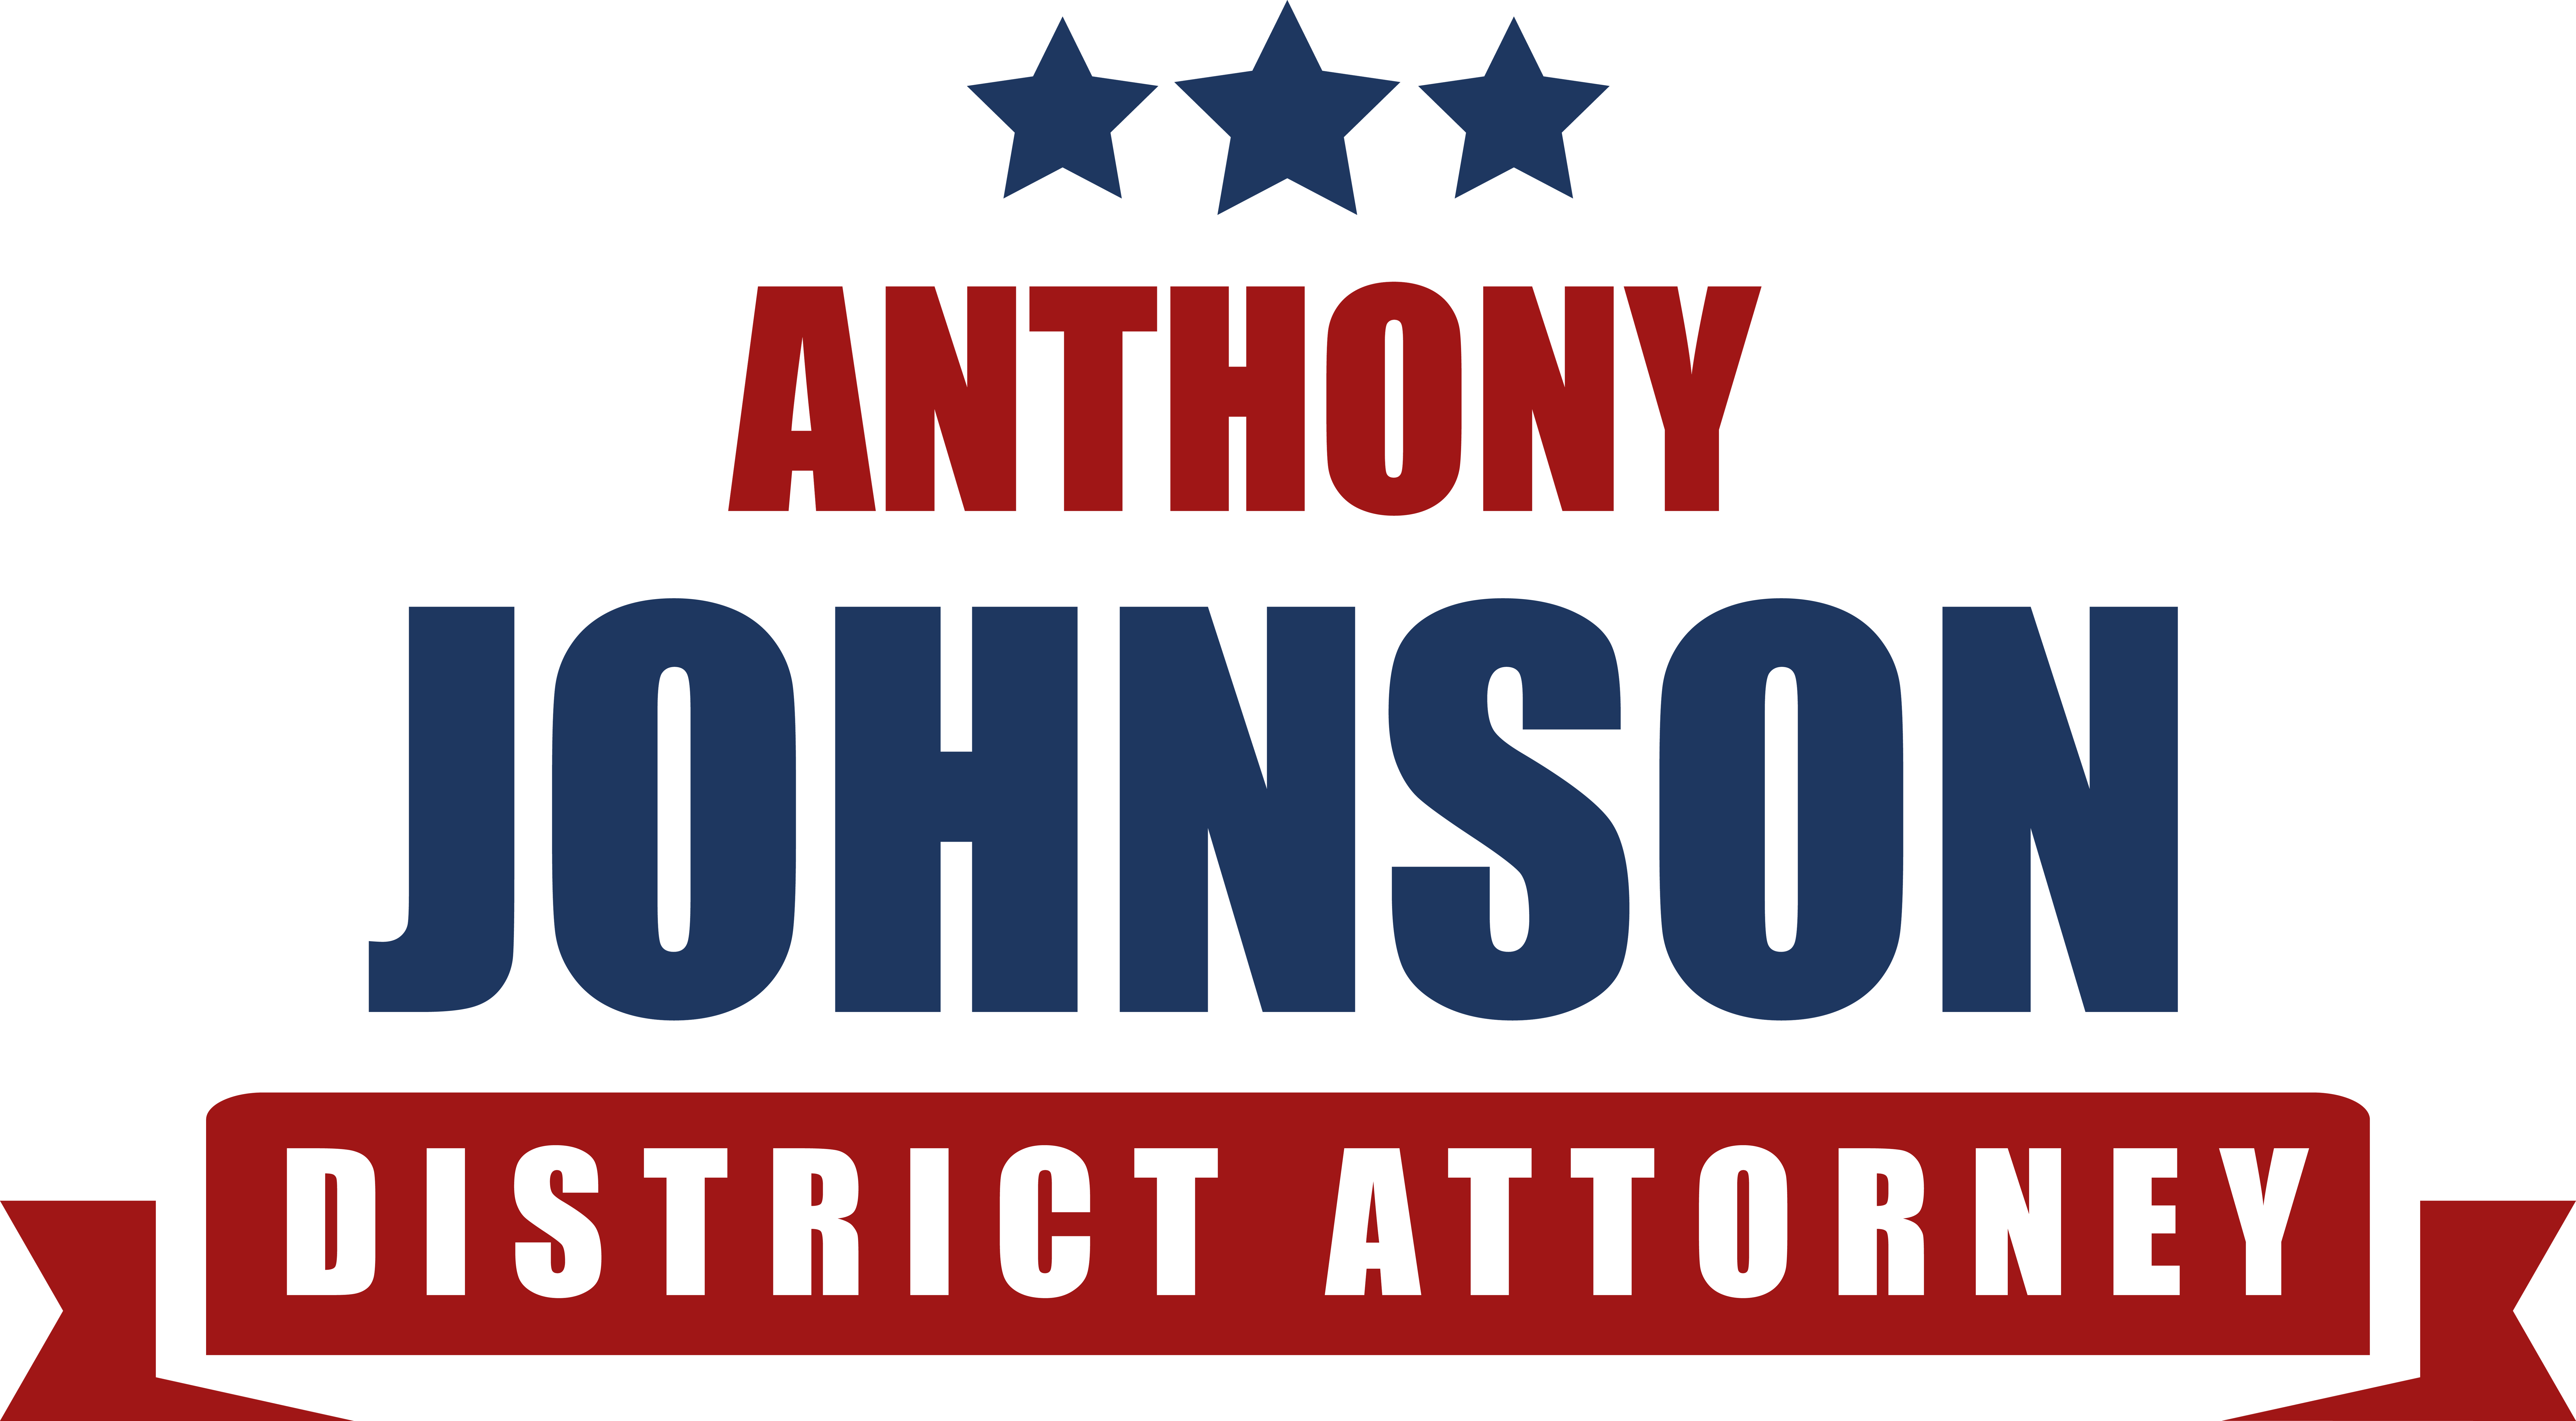 Anthony Johnson for District Attorney